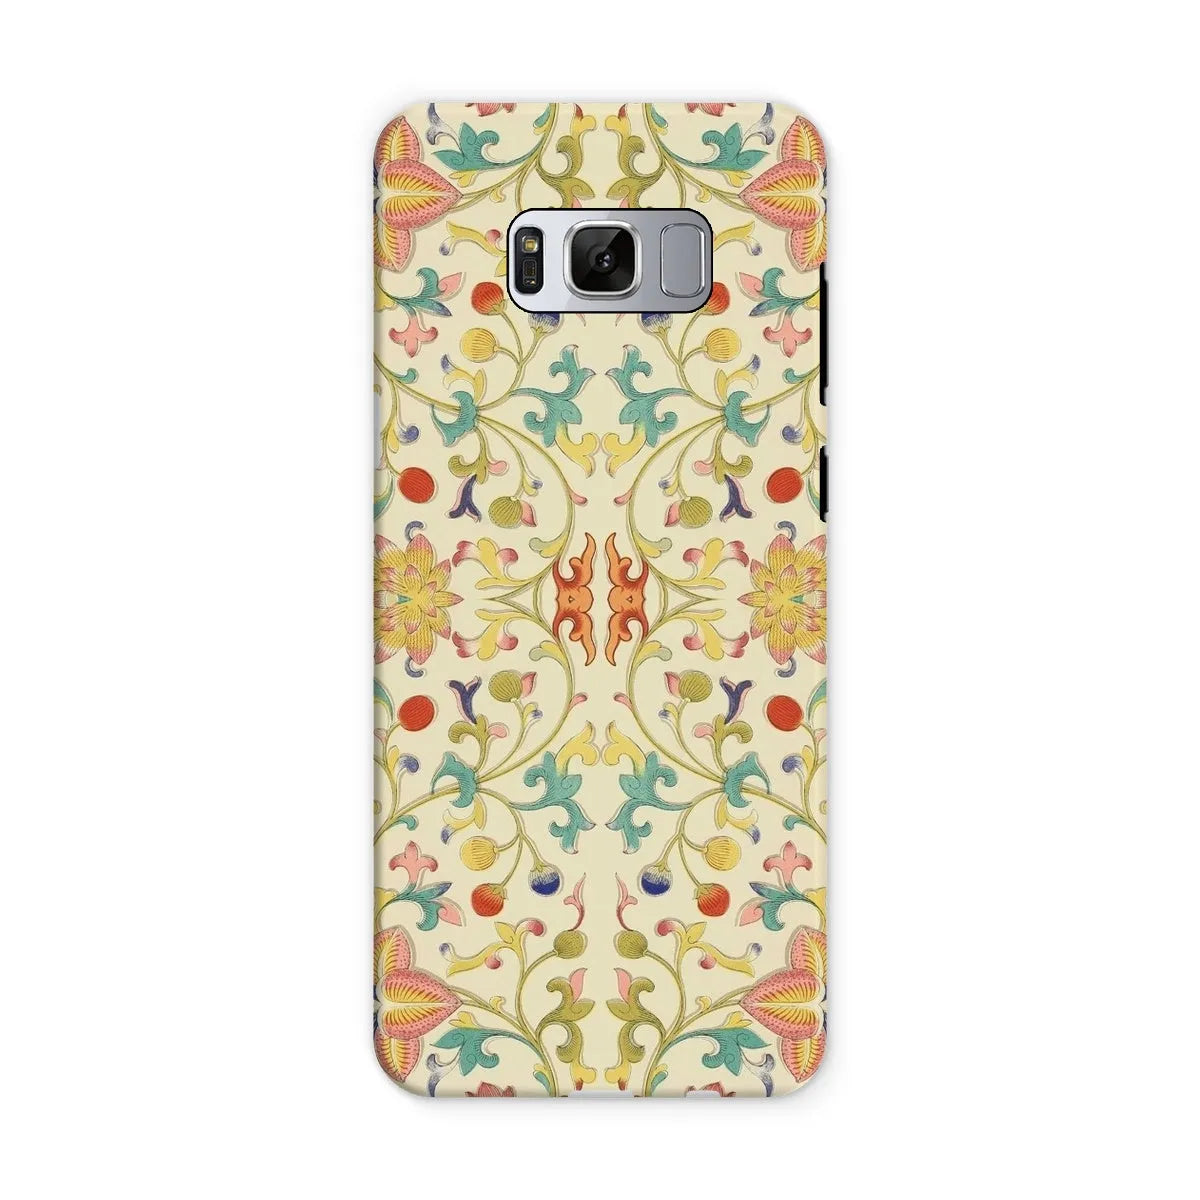 Over The Rainbow - Chinoiserie Pattern Art Phone Case - Samsung Galaxy S8 / Matte - Mobile Phone Cases - Aesthetic Art